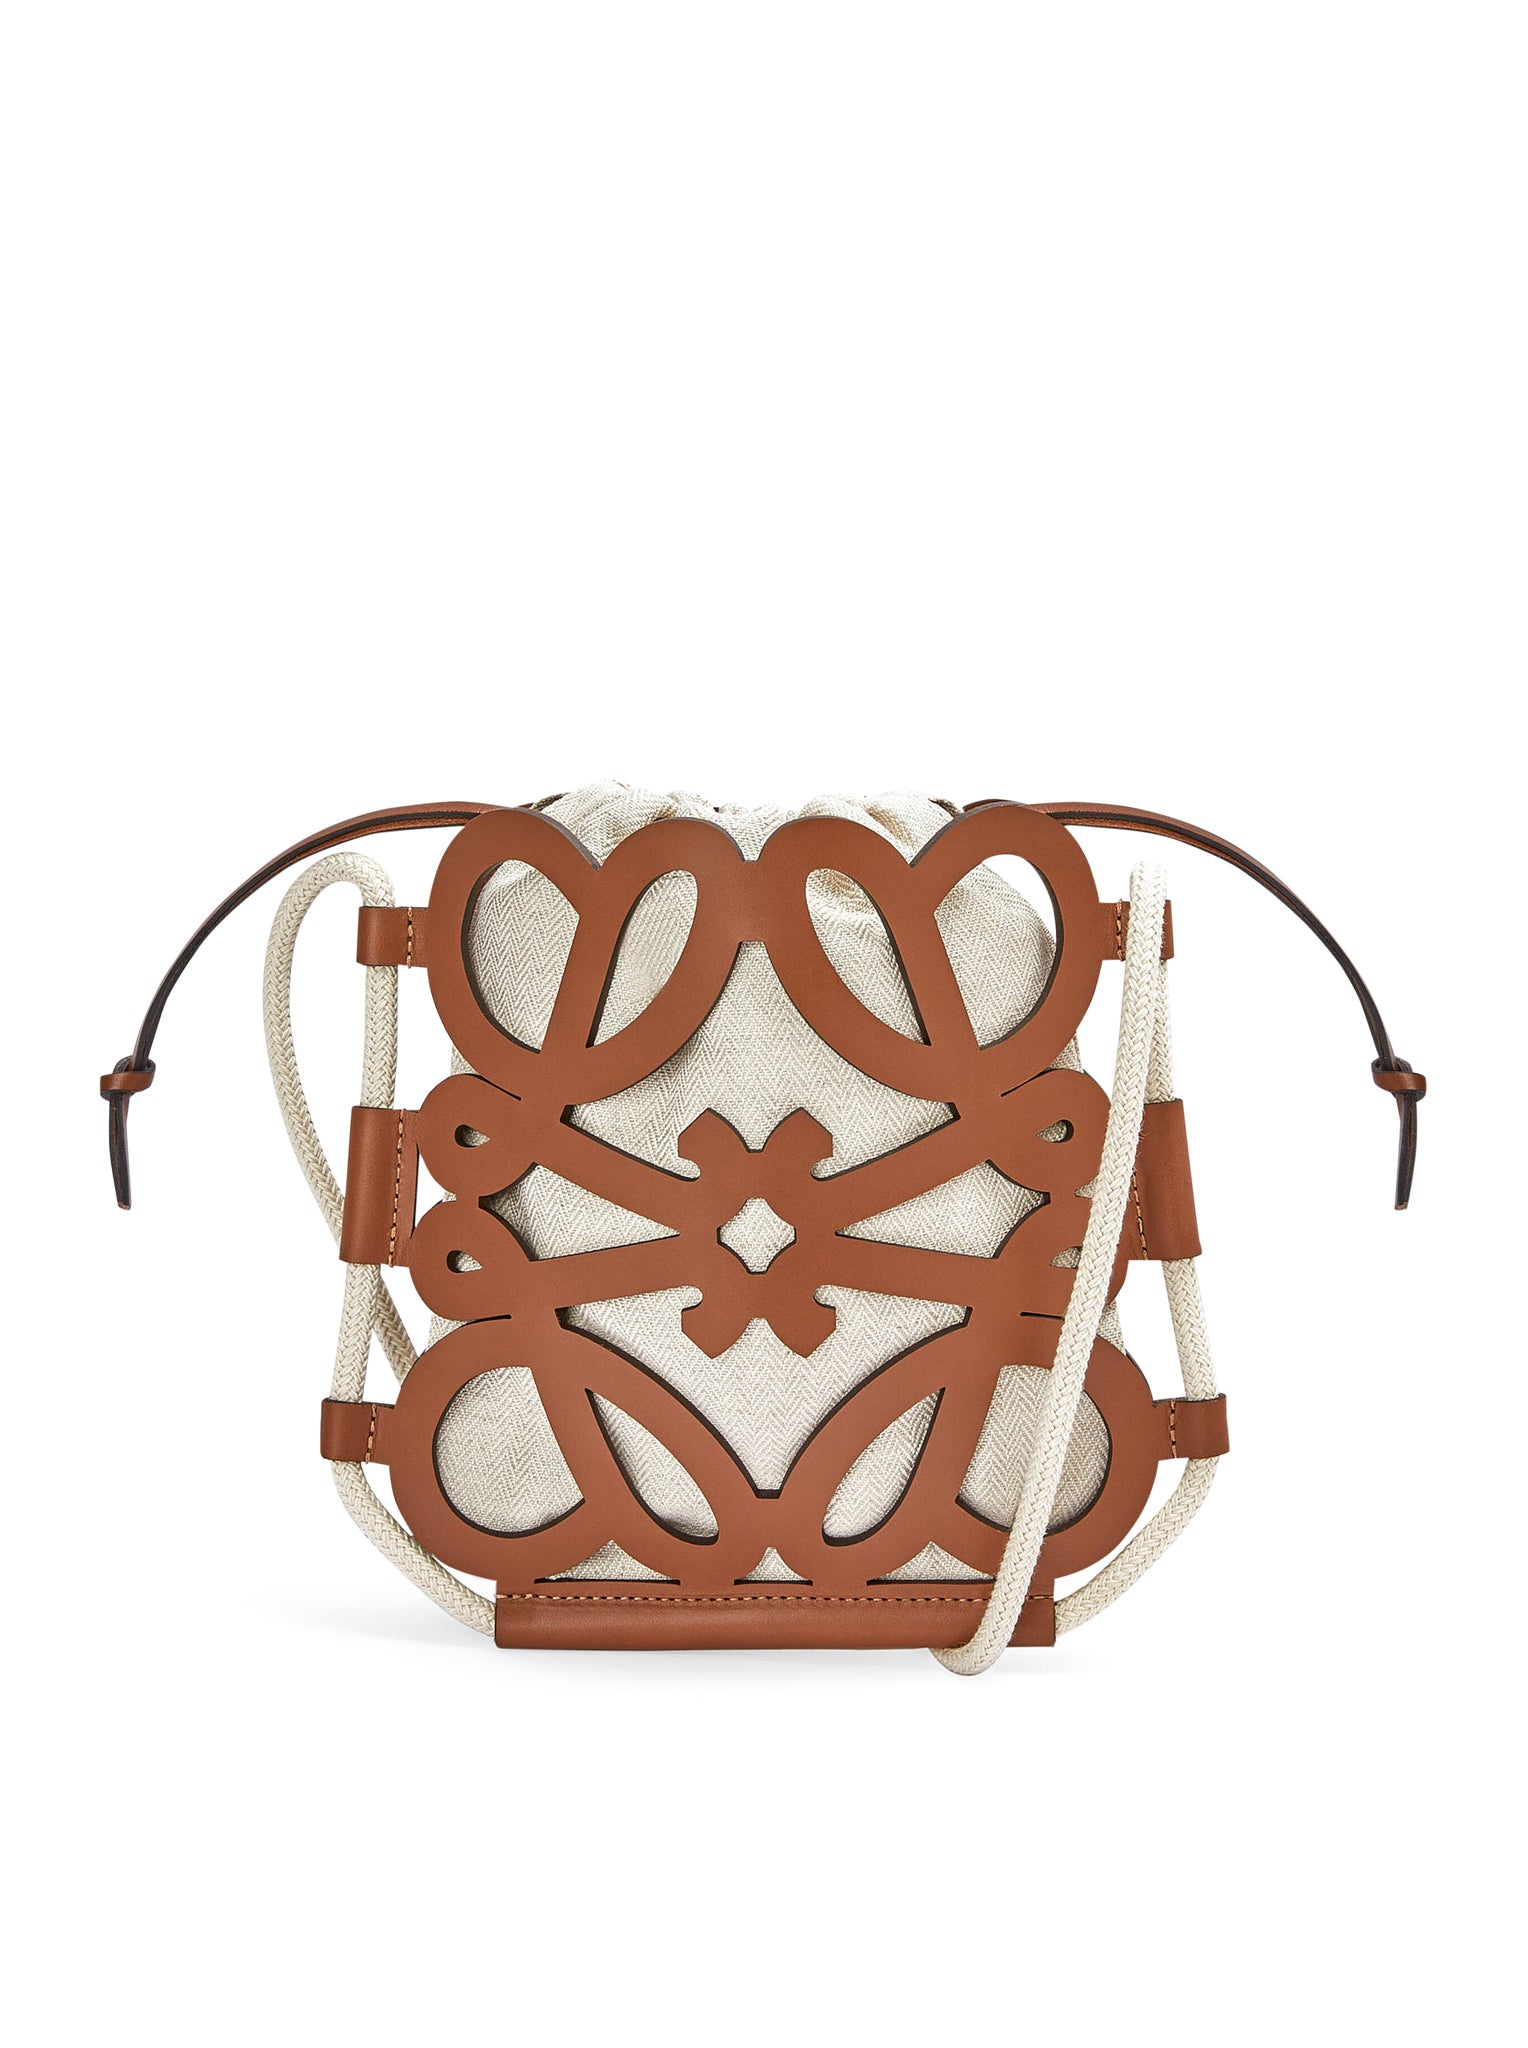 Anagram cut-out crossbody in classic calfskin and canvas